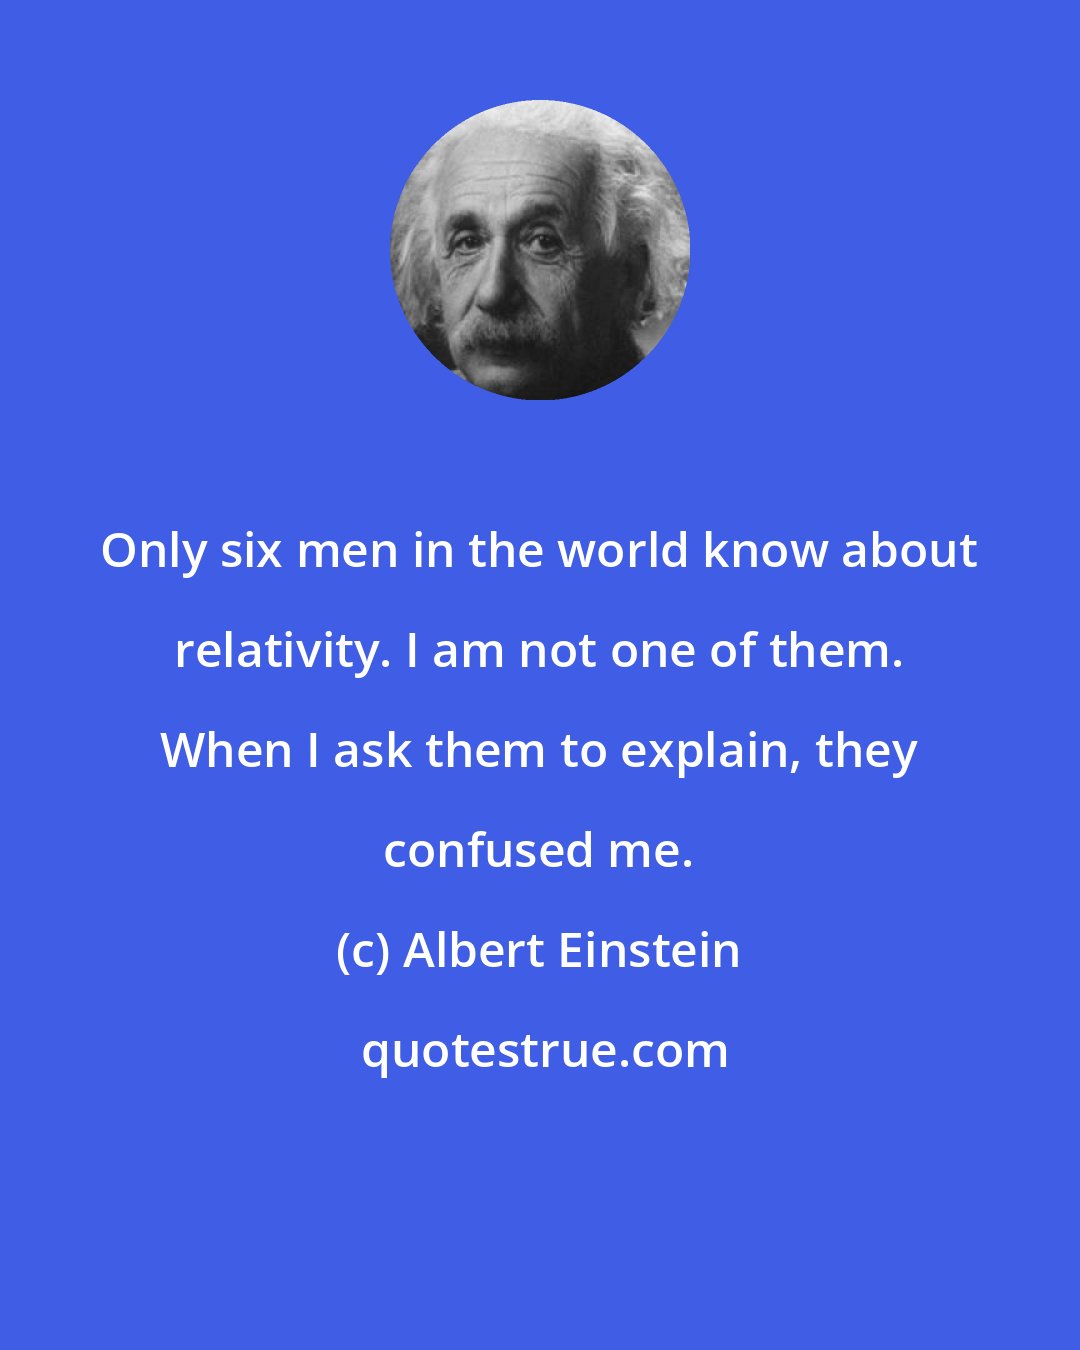 Albert Einstein: Only six men in the world know about relativity. I am not one of them. When I ask them to explain, they confused me.